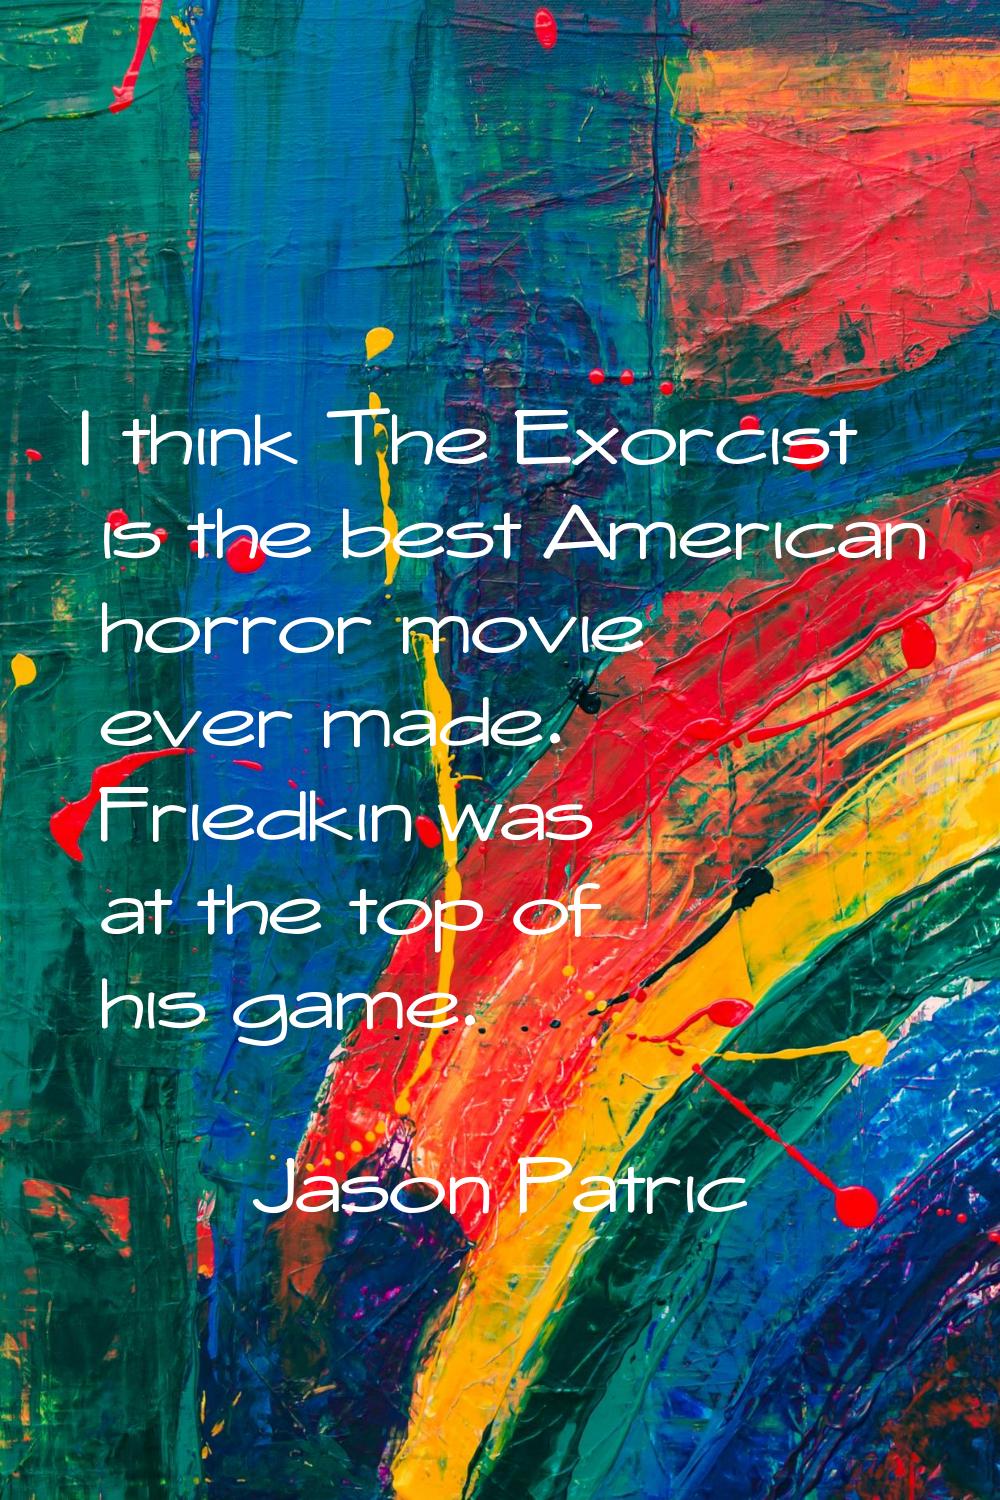 I think The Exorcist is the best American horror movie ever made. Friedkin was at the top of his ga